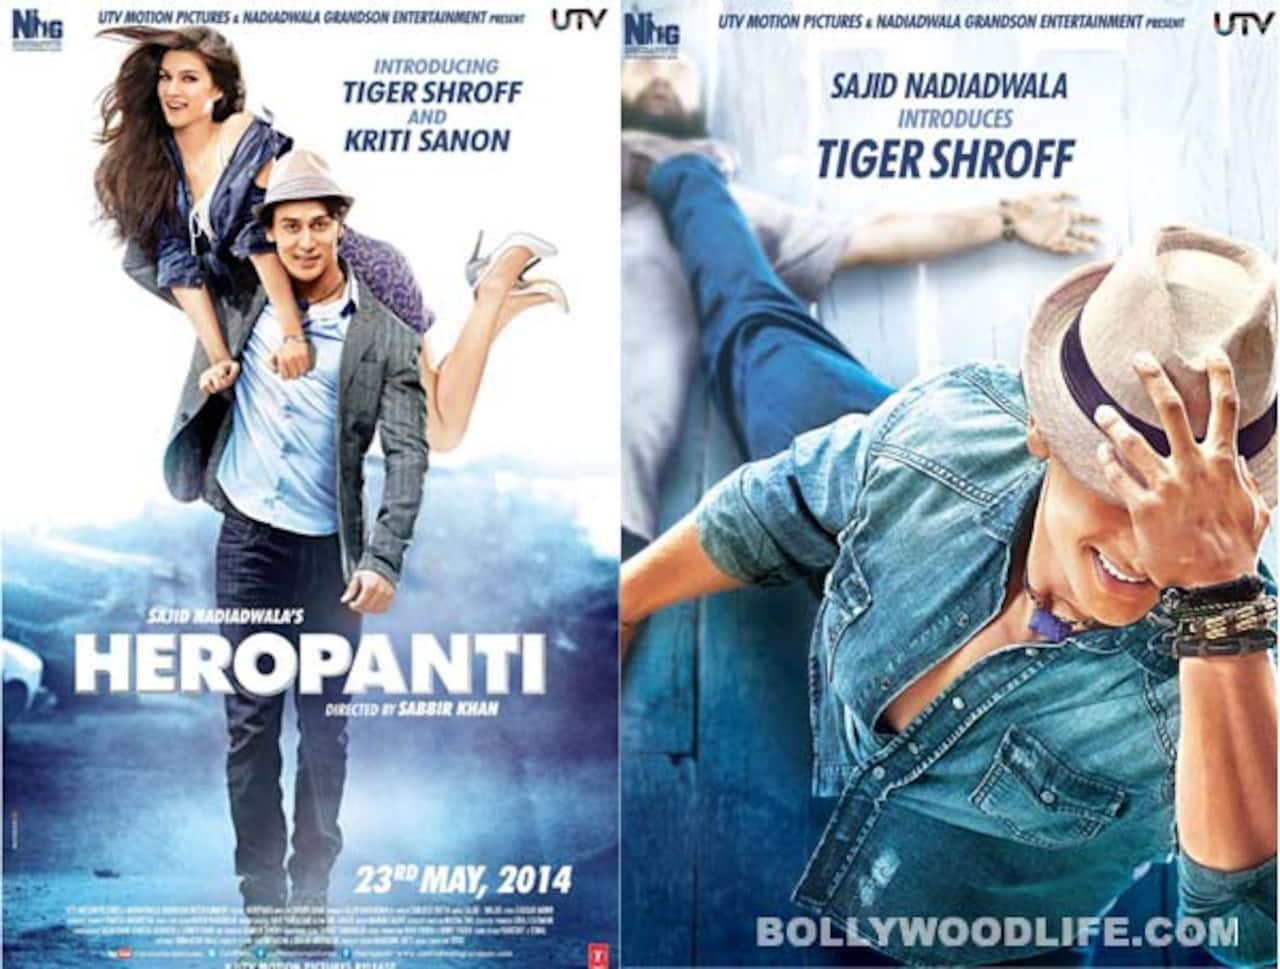 Heropanti Posters What Are Tiger Shroff And Kriti Sanon Upto Bollywood News And Gossip Movie